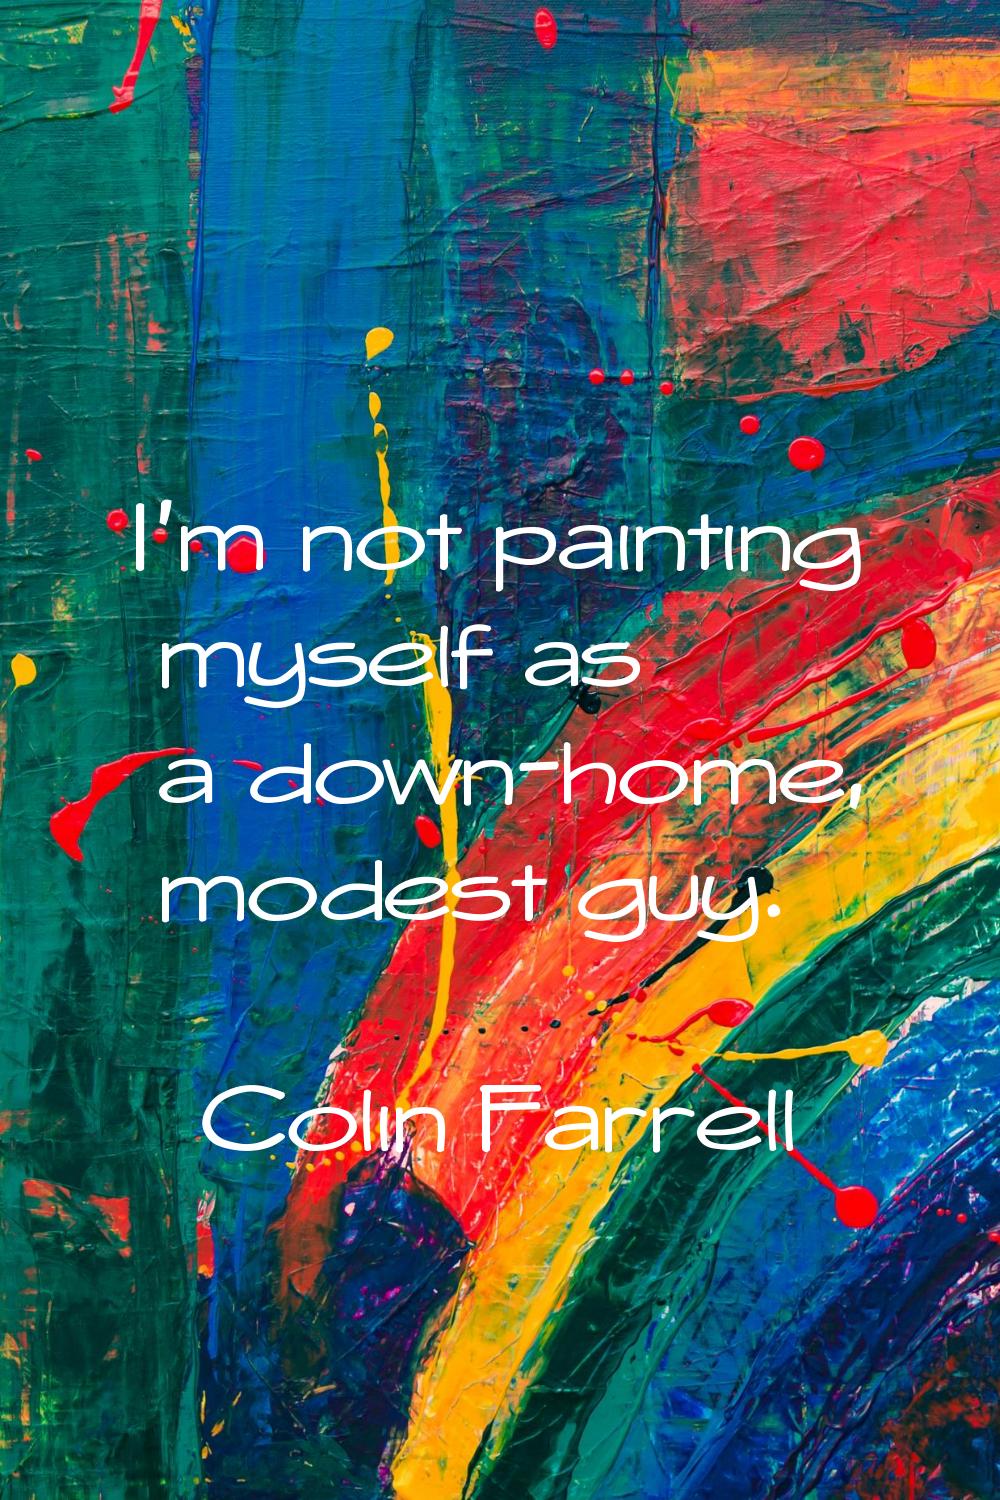 I'm not painting myself as a down-home, modest guy.